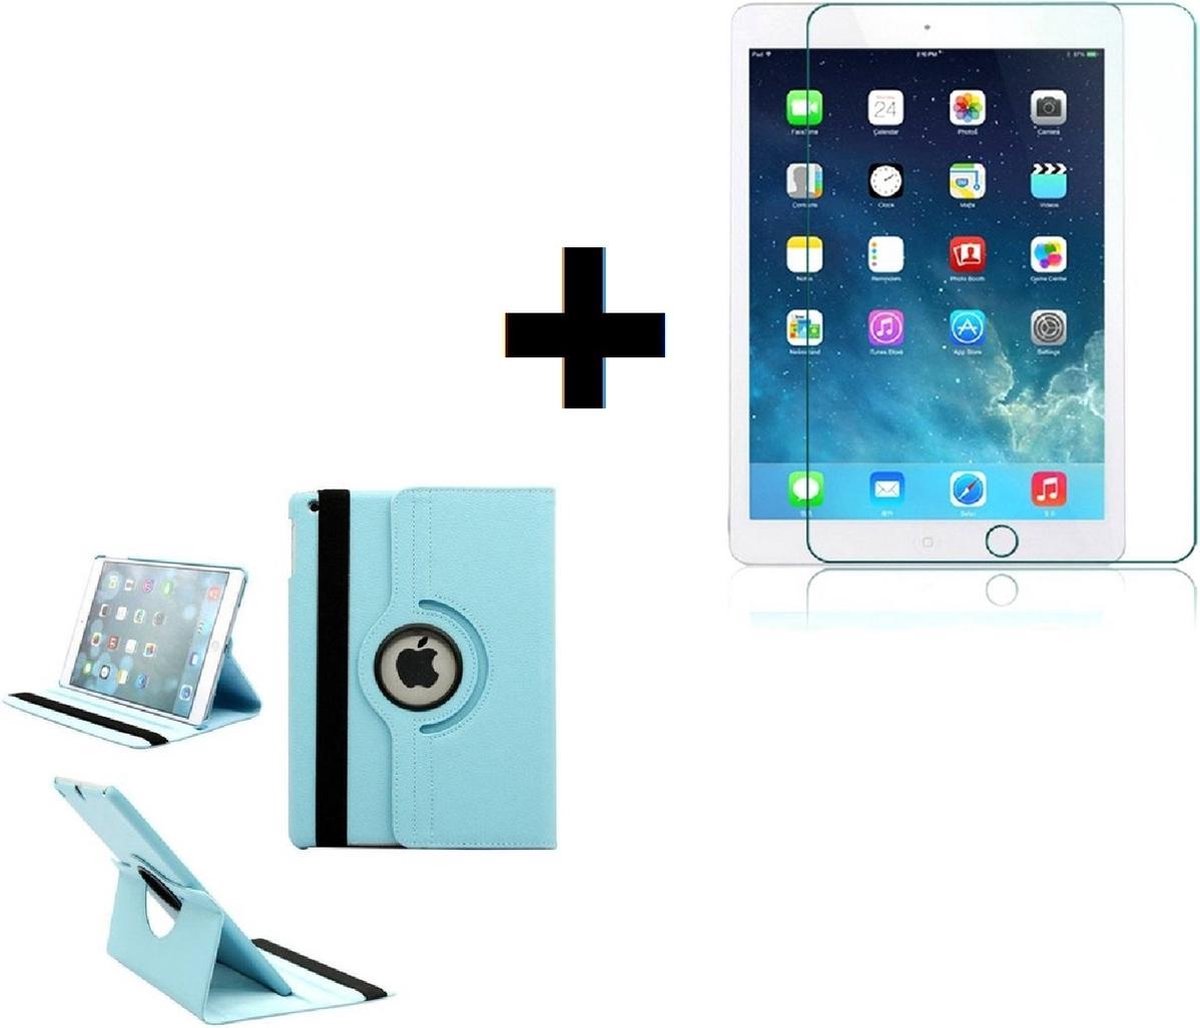 iPad 2019-2020 Hoesje - 10.2 inch - ipad 2019-2020 Screenprotector - ipad 2020 Bookcase Bescherm Cover Hoes Turquoise + Screen Protector Tempered Glass